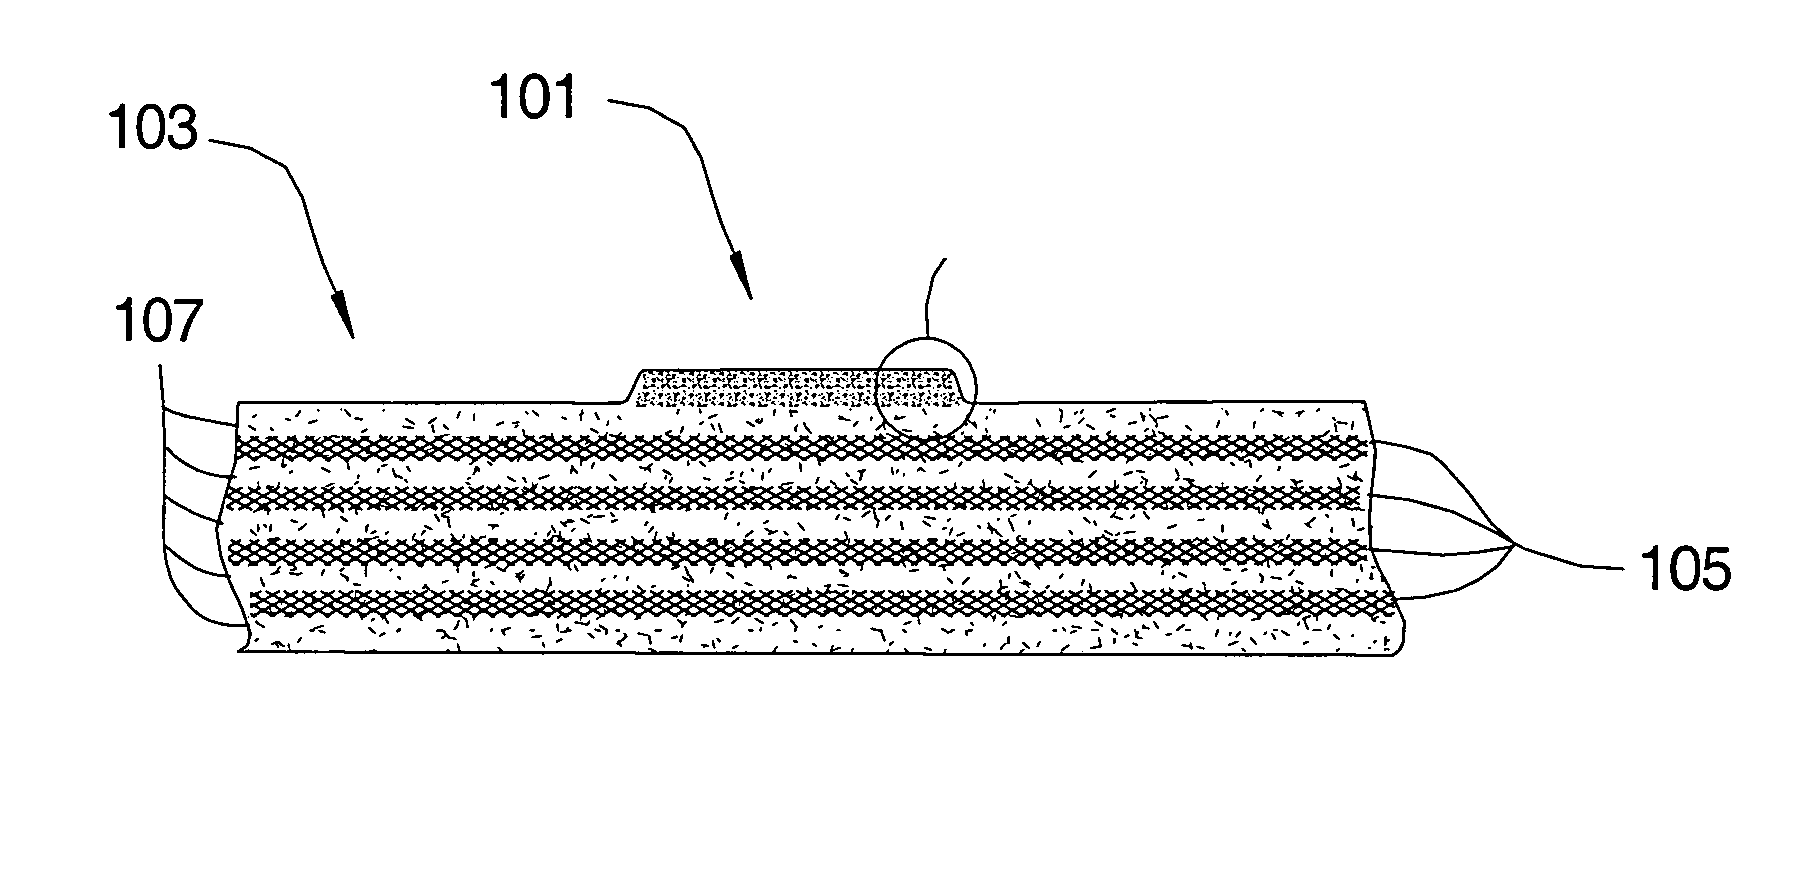 Heath monitoring method and apparatus for composite materials